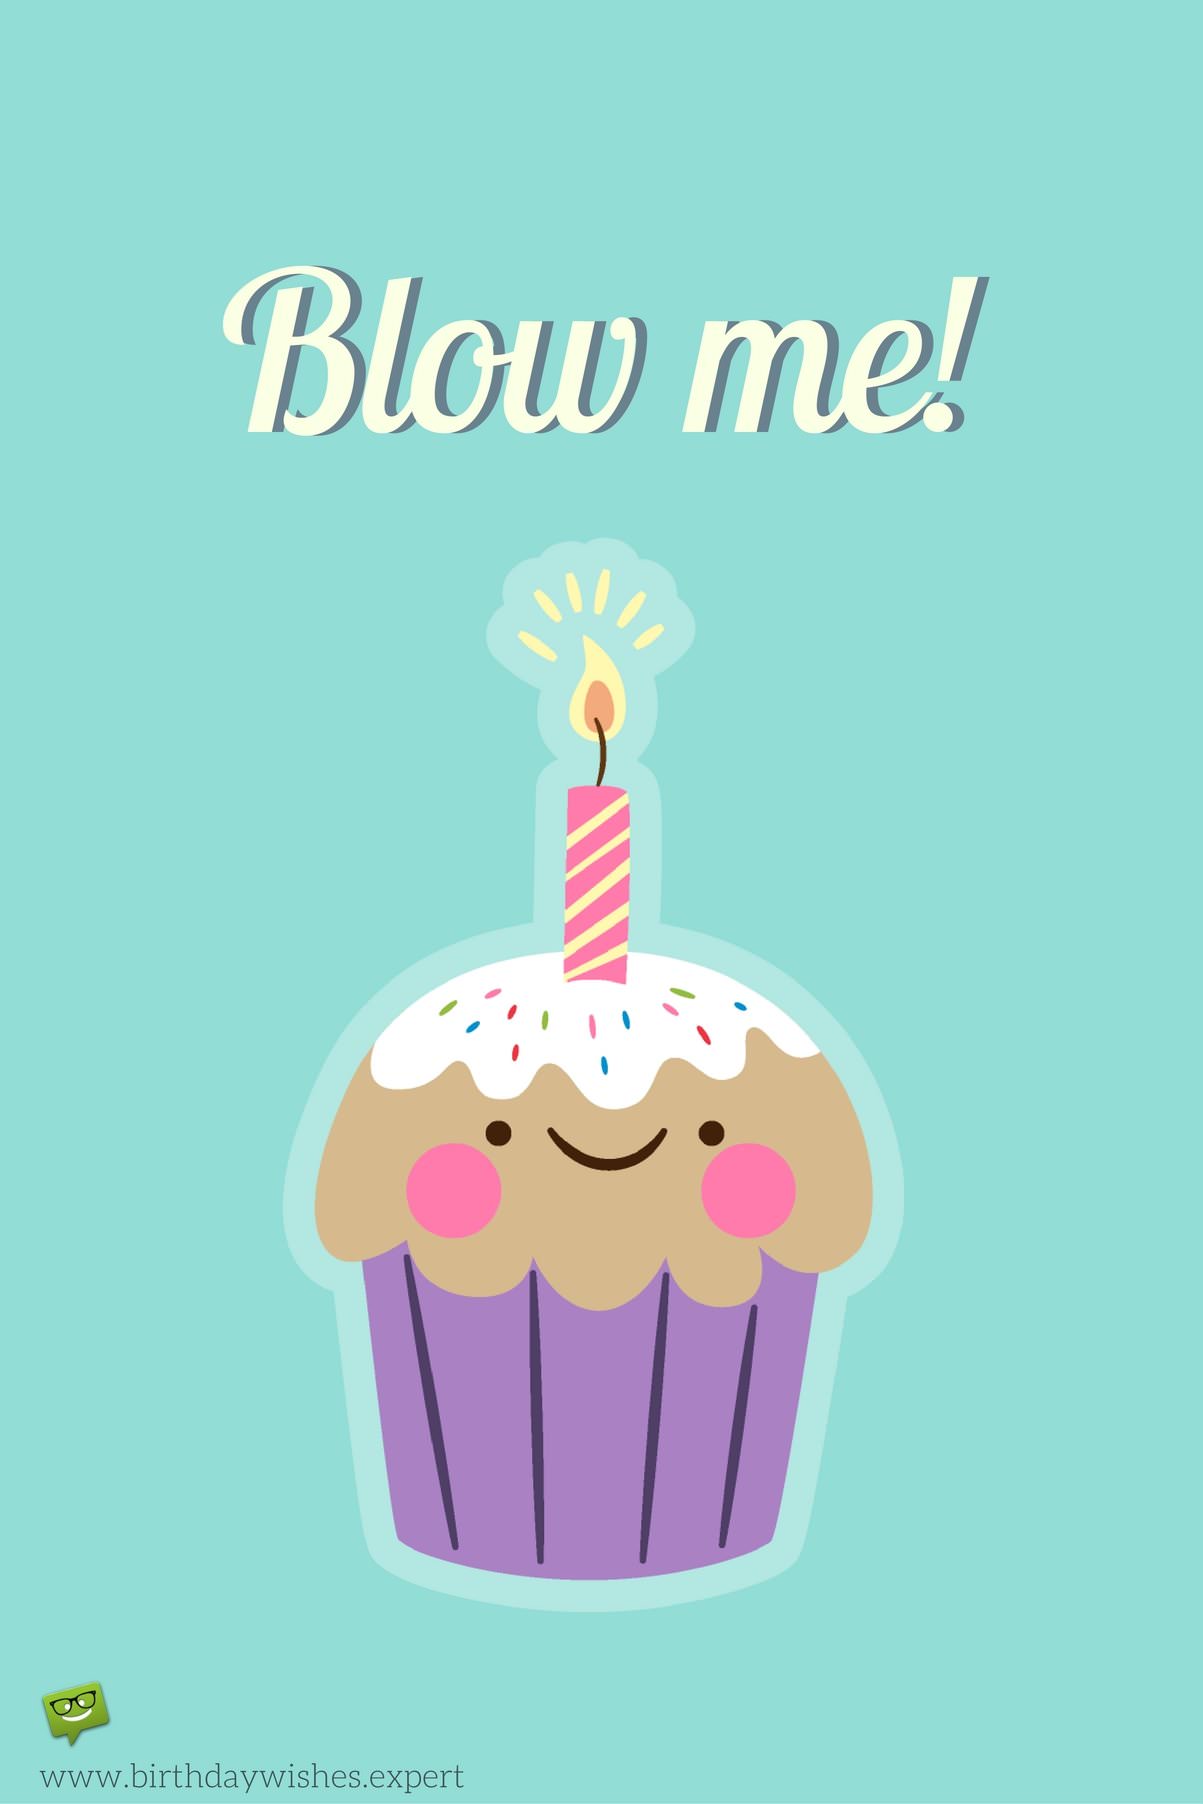 Funny Birthday Message For A Friend On Image With Cute Cup Cake